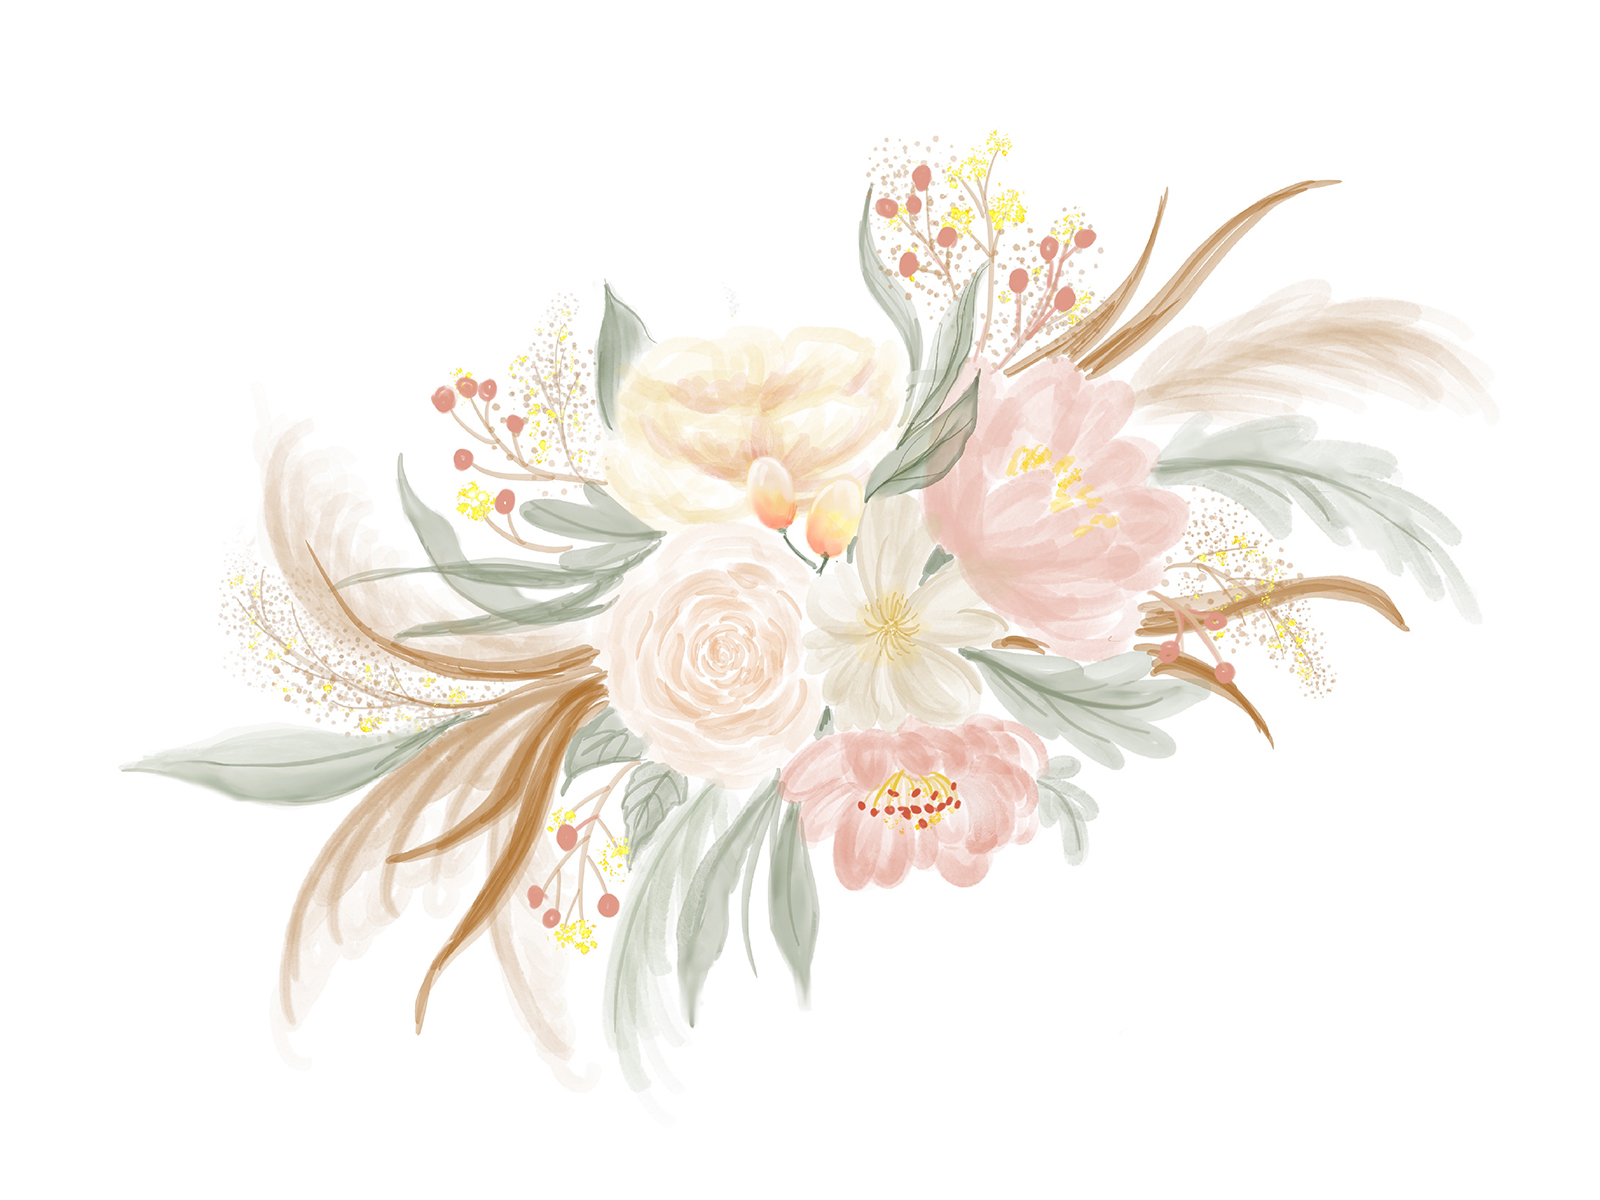 loose flower bouquet watercolor no.03 by Planolla on Dribbble